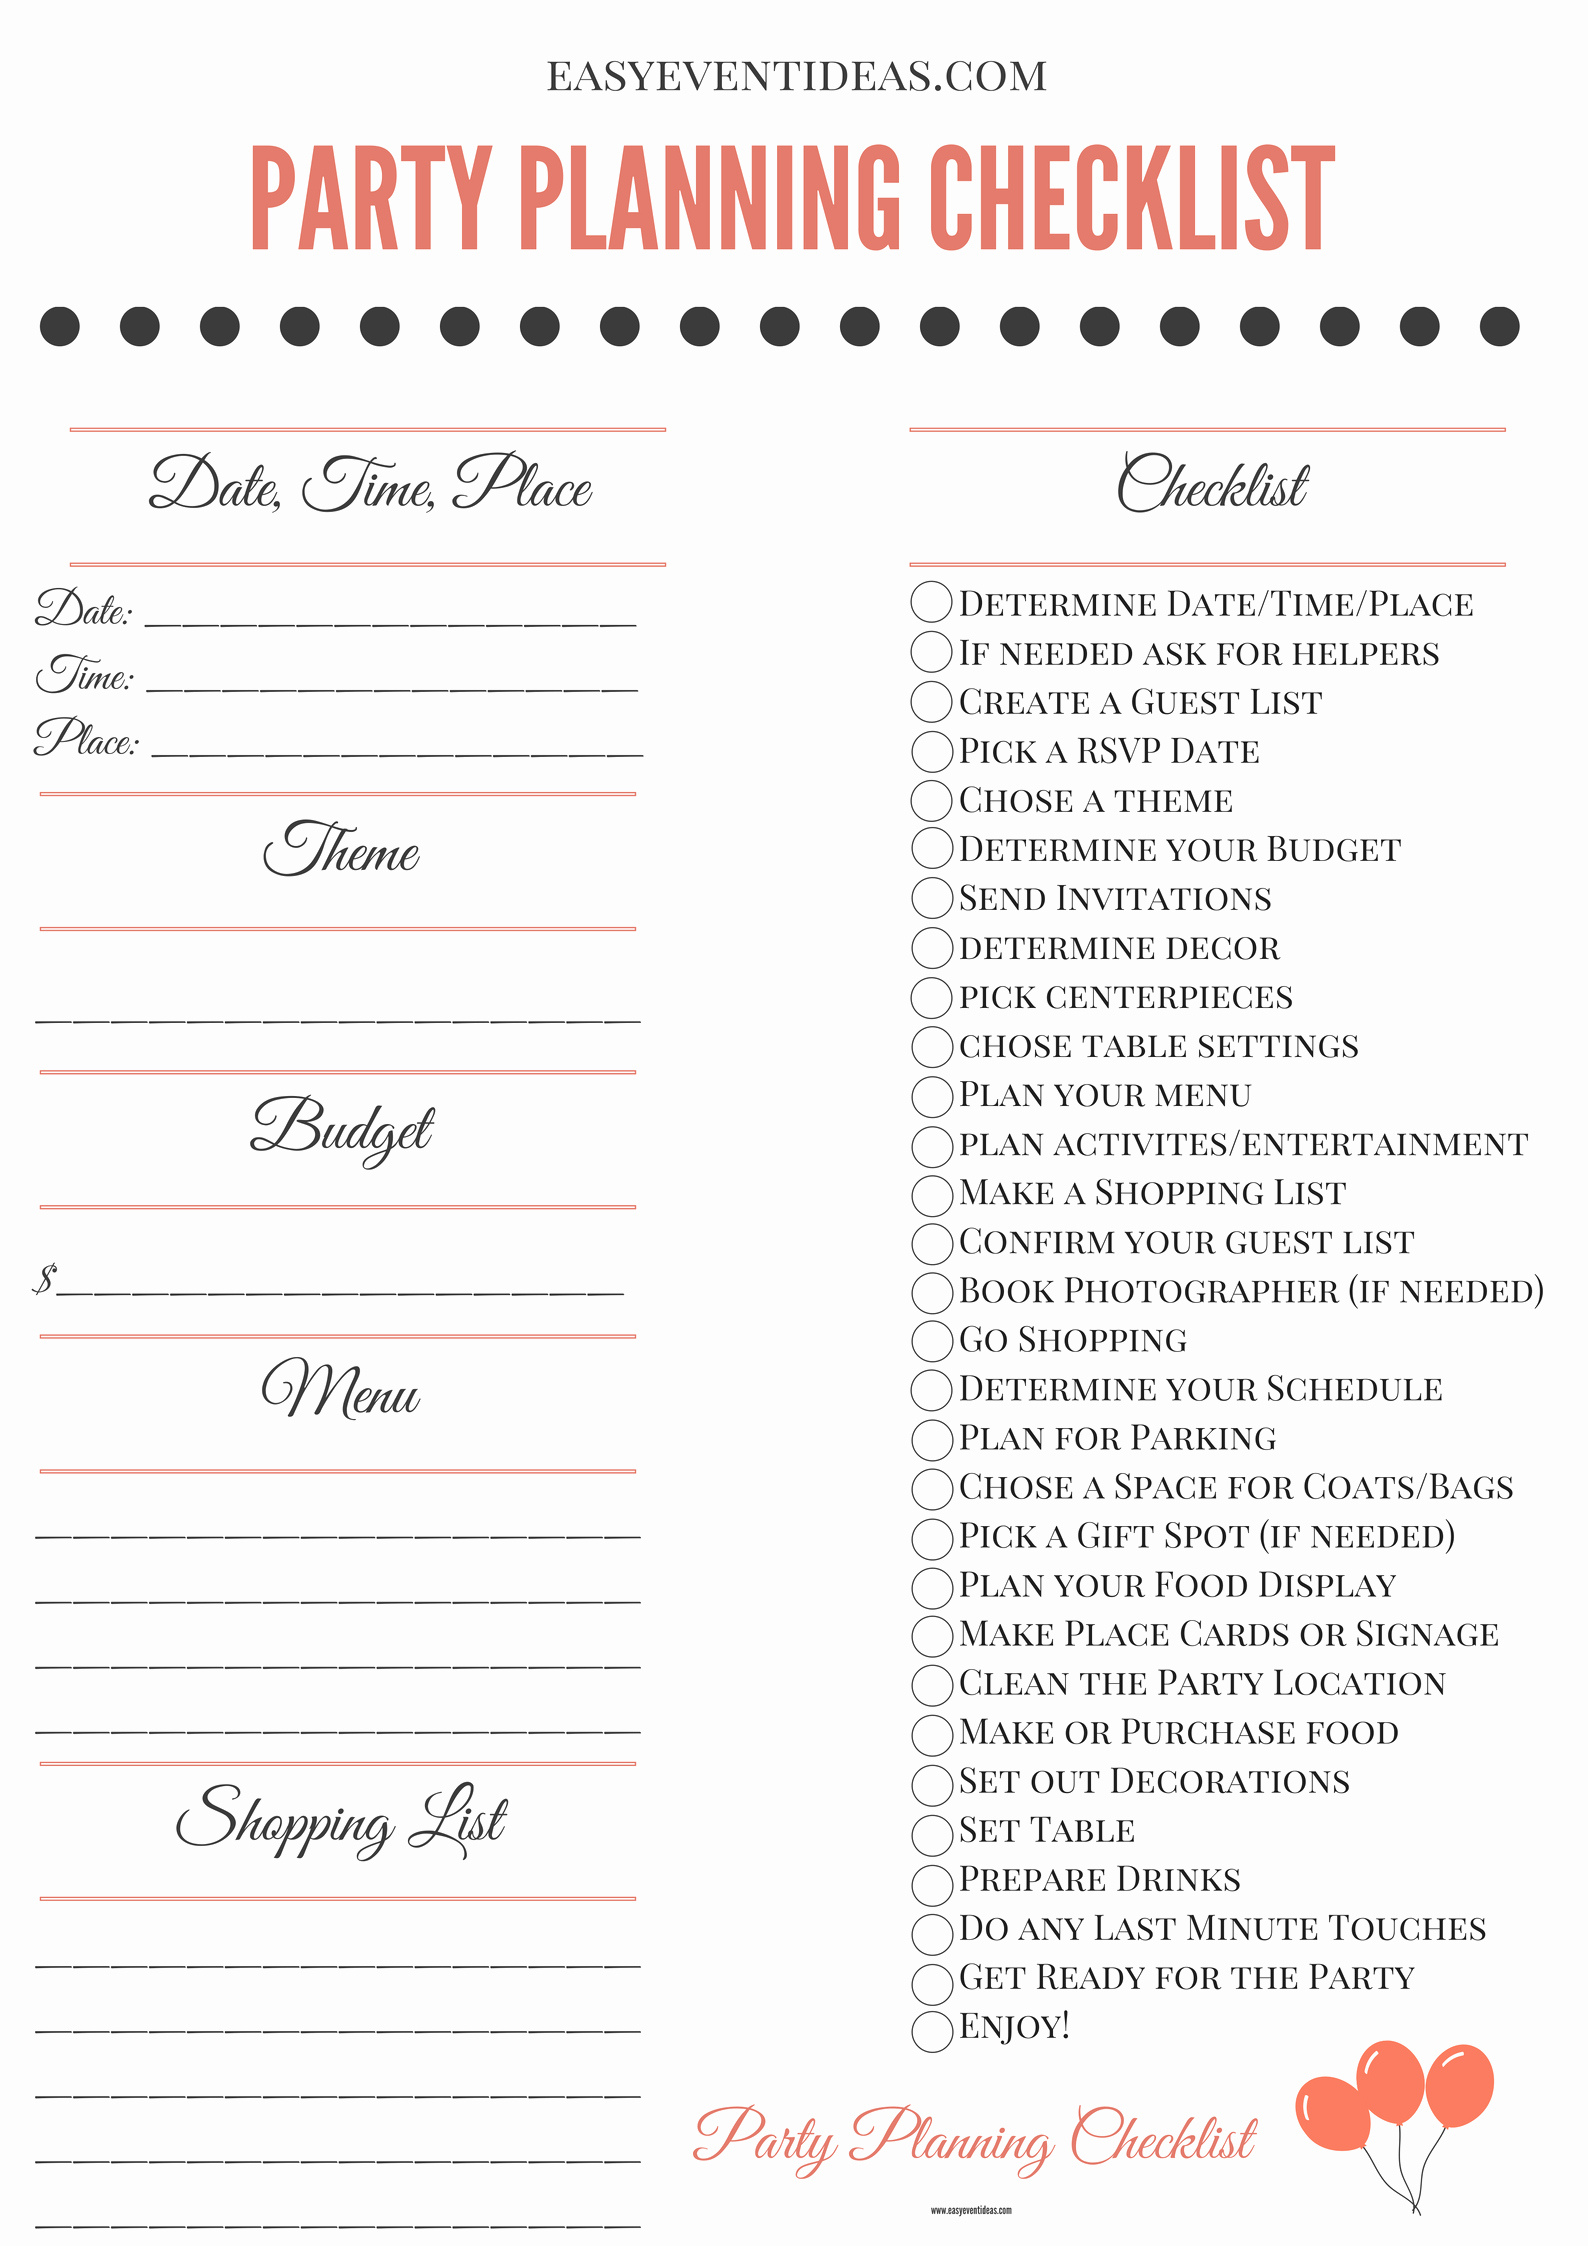 Printable Party Planning Checklist – Easy event Ideas